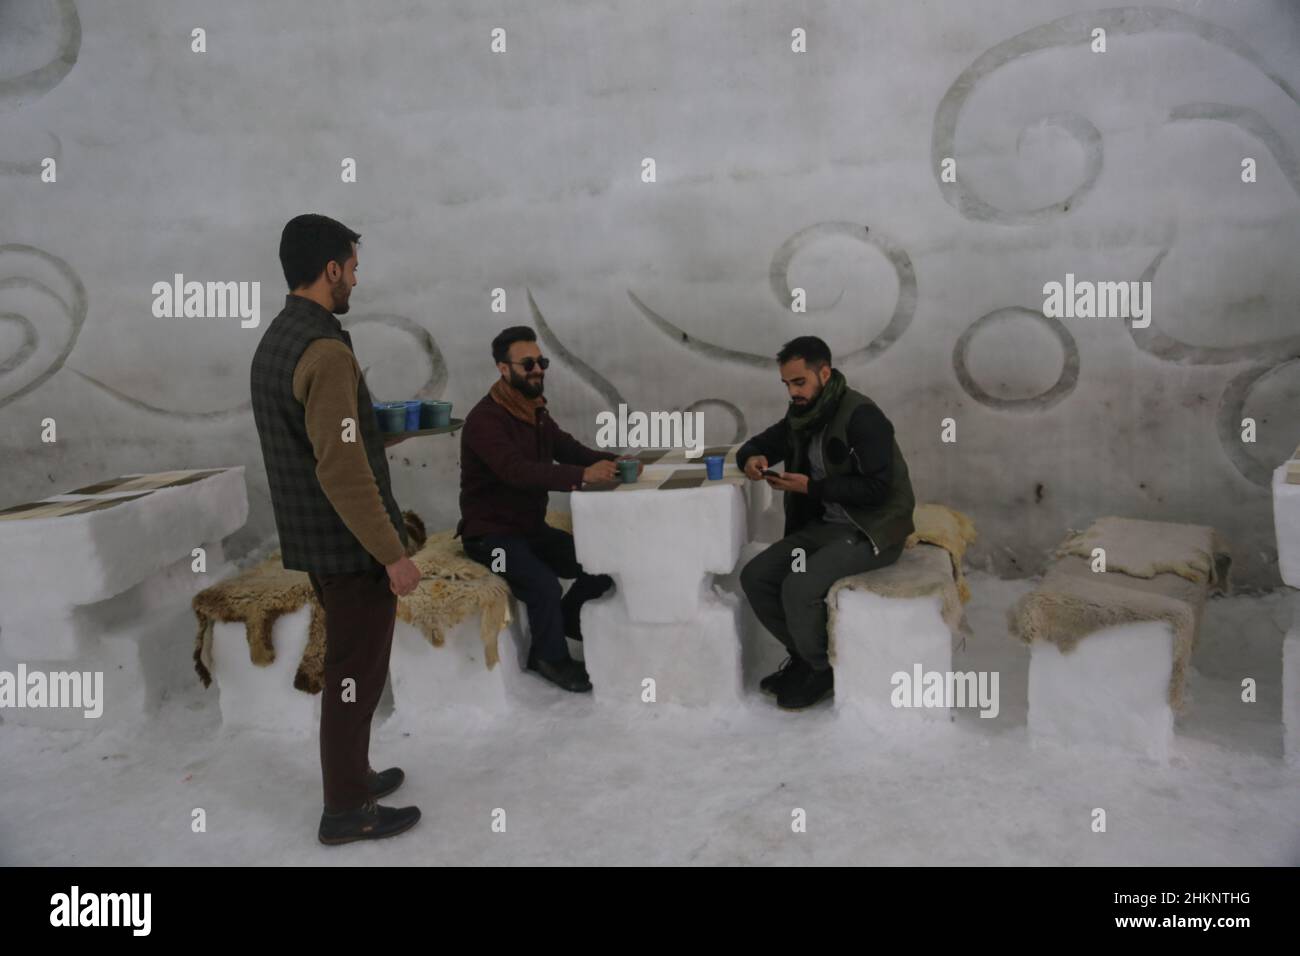 Srinagar, India. 05th Feb, 2022. Visitors sit and have drinks inside Asia's biggest Igloo Cafe made of snow in Gulmarg. The Igloo Cafe is approximately 37.5 feet tall and 45 feet round and can accommodate fifteen tables and around 60 guests. The Igloo Cafe offers tables made of ice and snow, with hot dishes served to visitors (Photo by Sajad Hameed/Pacific Press) Credit: Pacific Press Media Production Corp./Alamy Live News Stock Photo